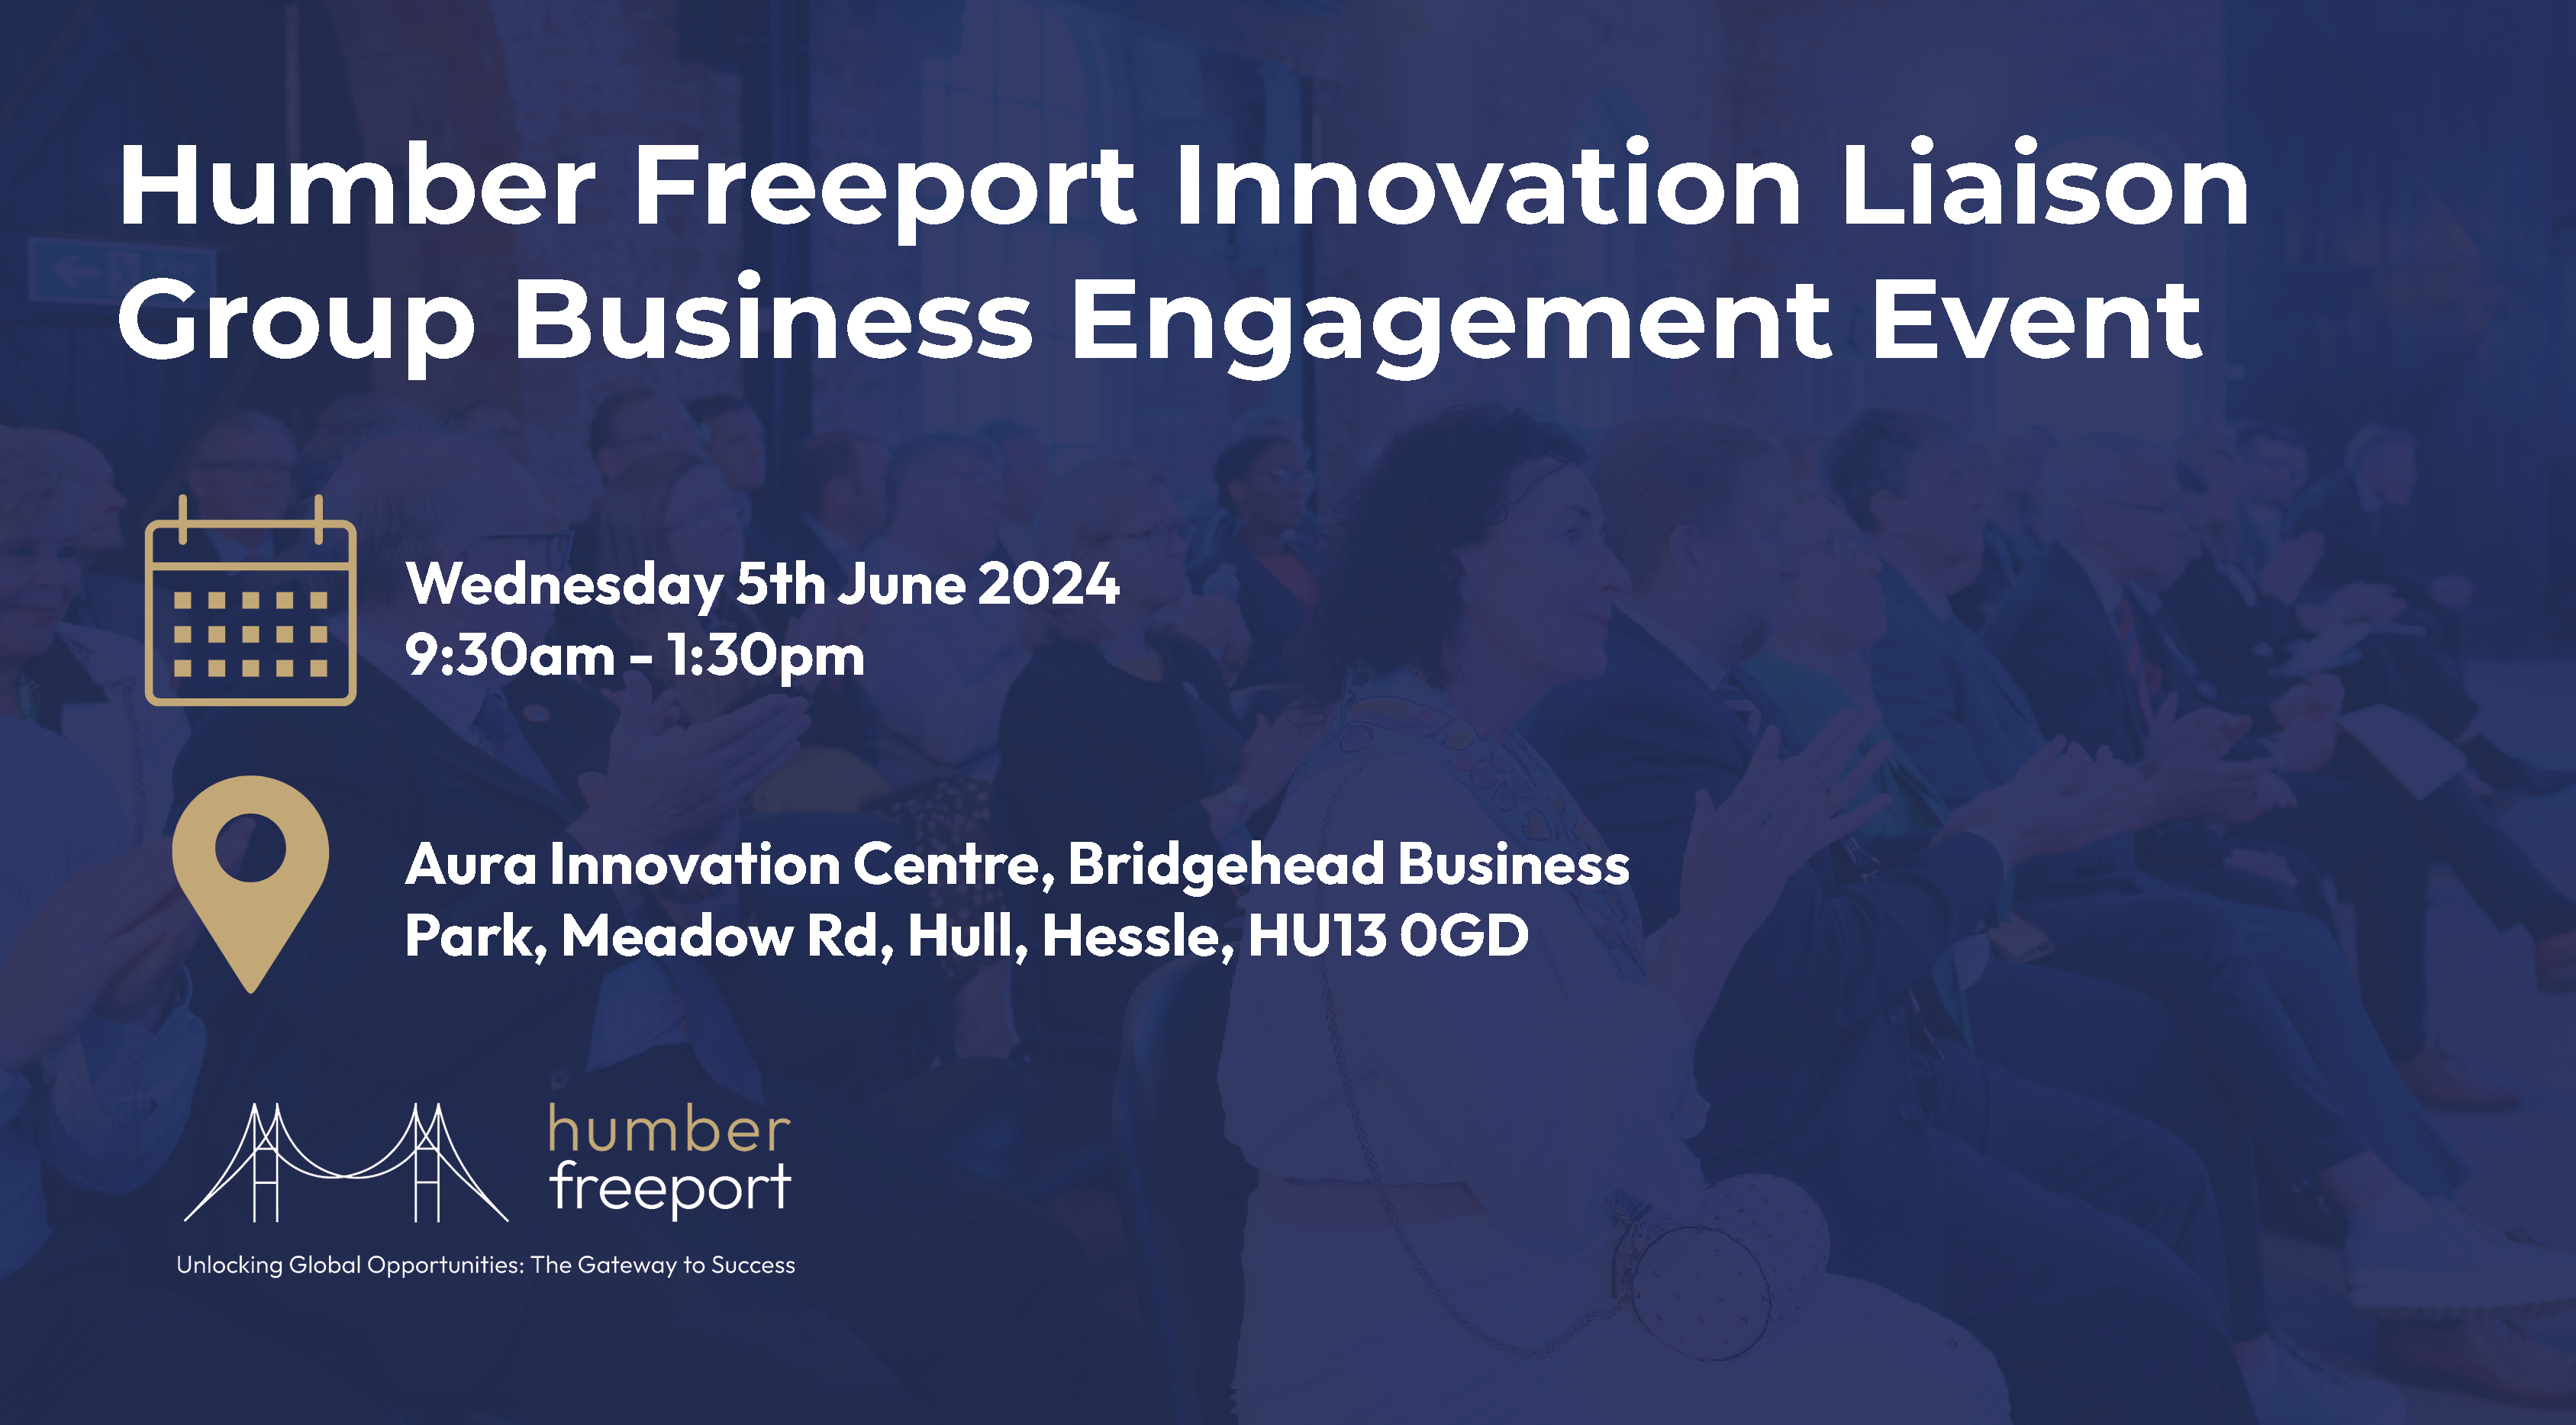 Humber Freeport Innovation Liaison Group Business Engagement Event